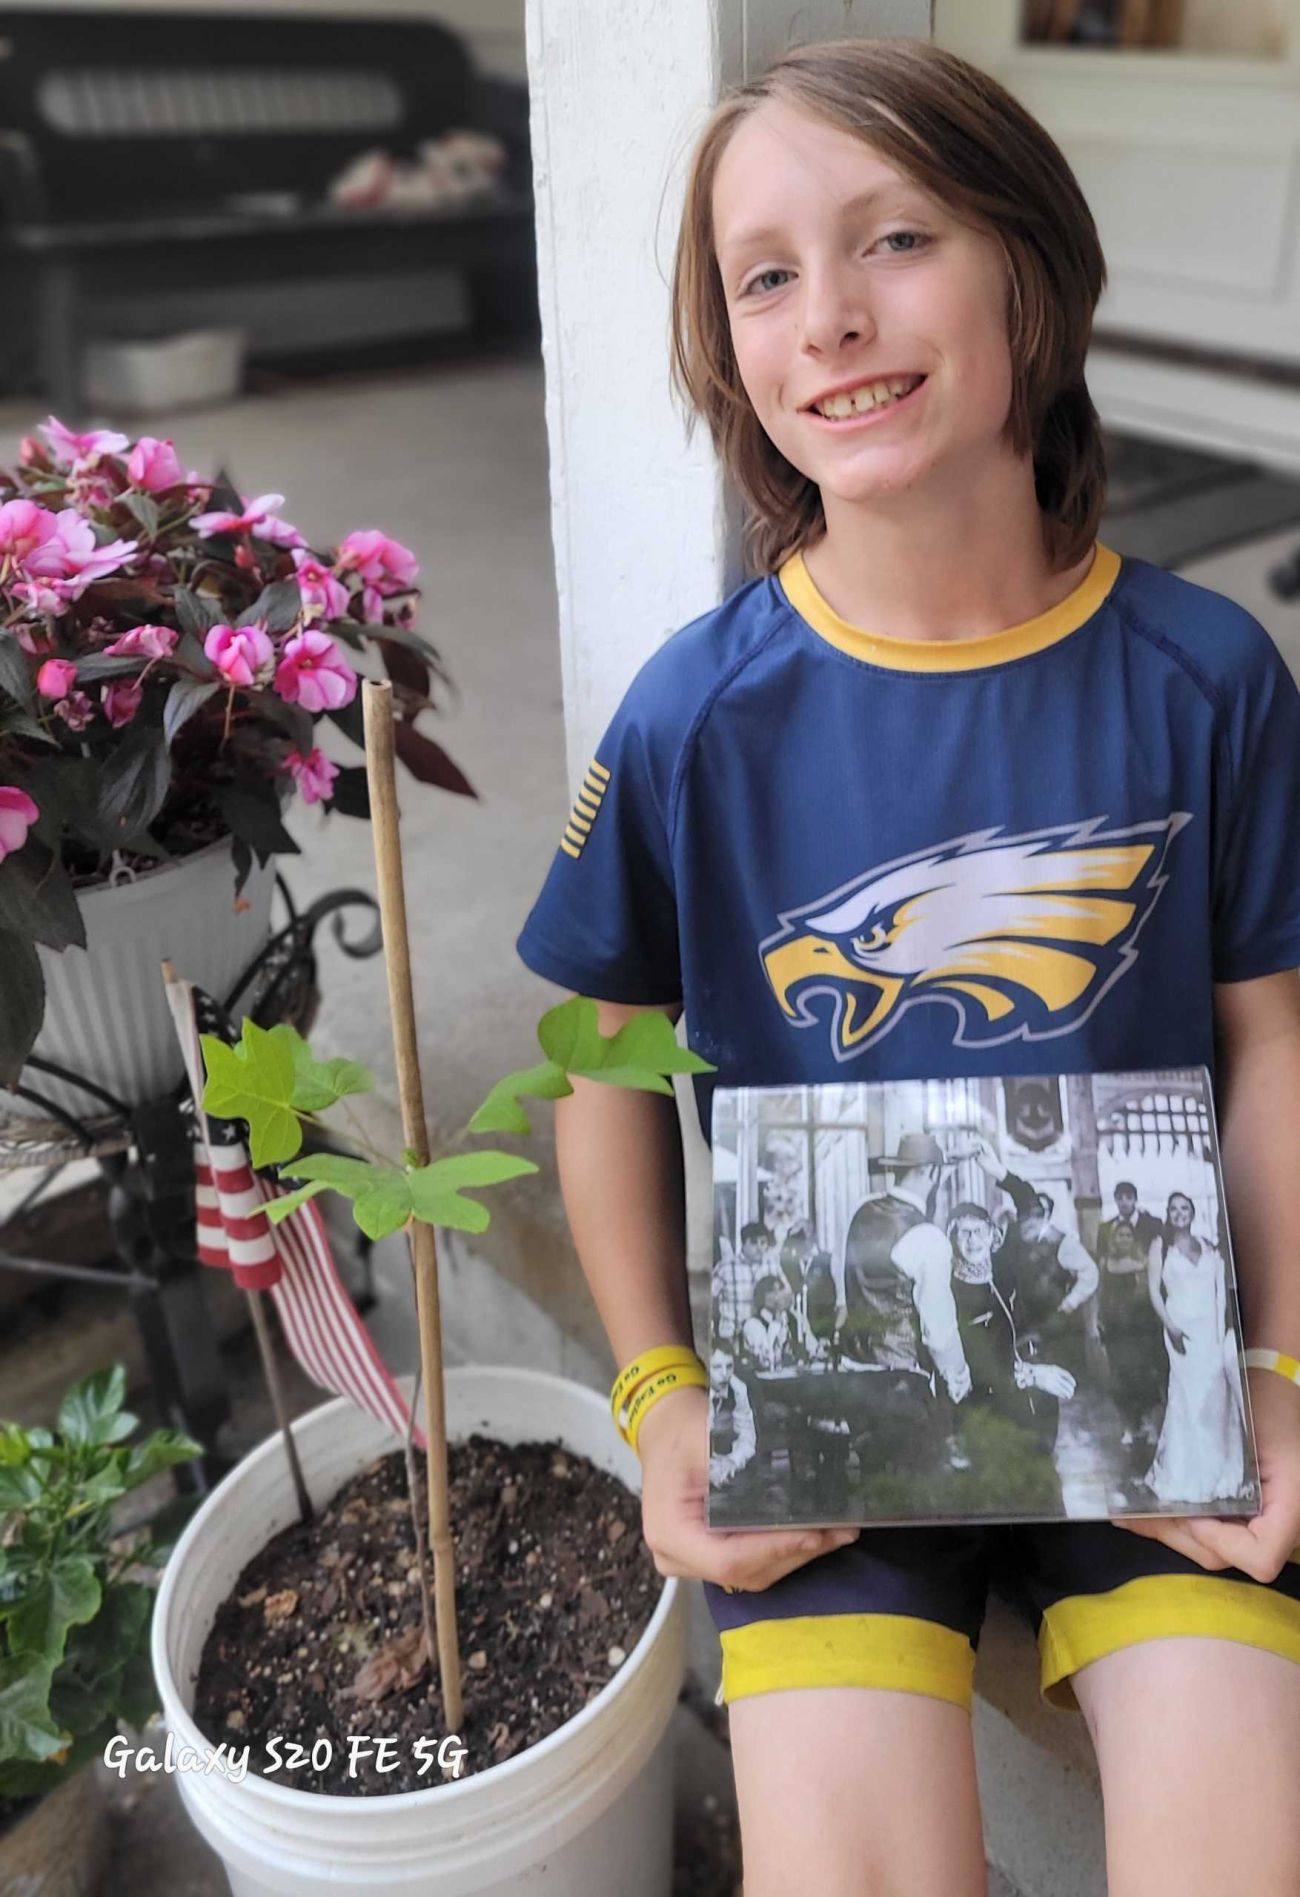 boy holding a photo next to a small tulip tree in a pot